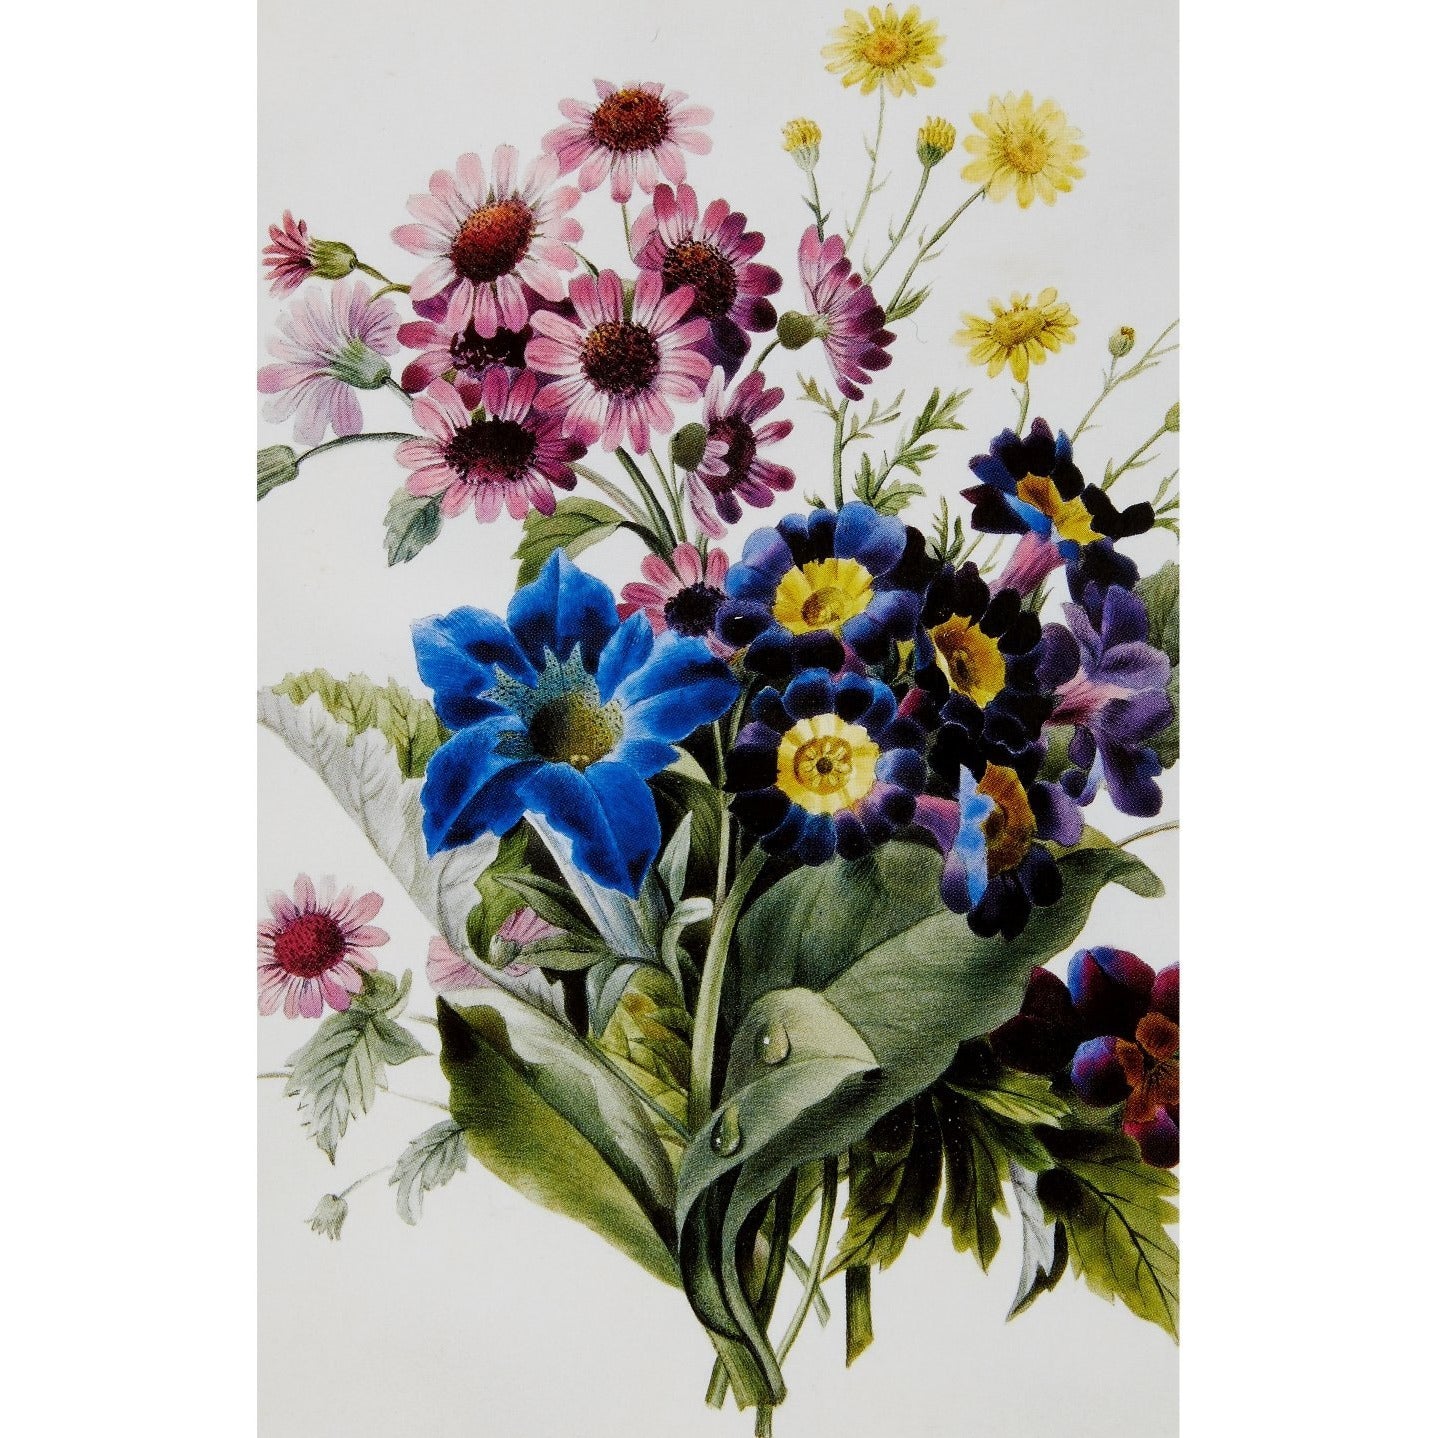 Notecard - Mixed Flowers with auricula and gentian by Louise d'Orleans. From the Broughton Collection of the Fitzwilliam Museum, brought to you by CuratingCambridge.